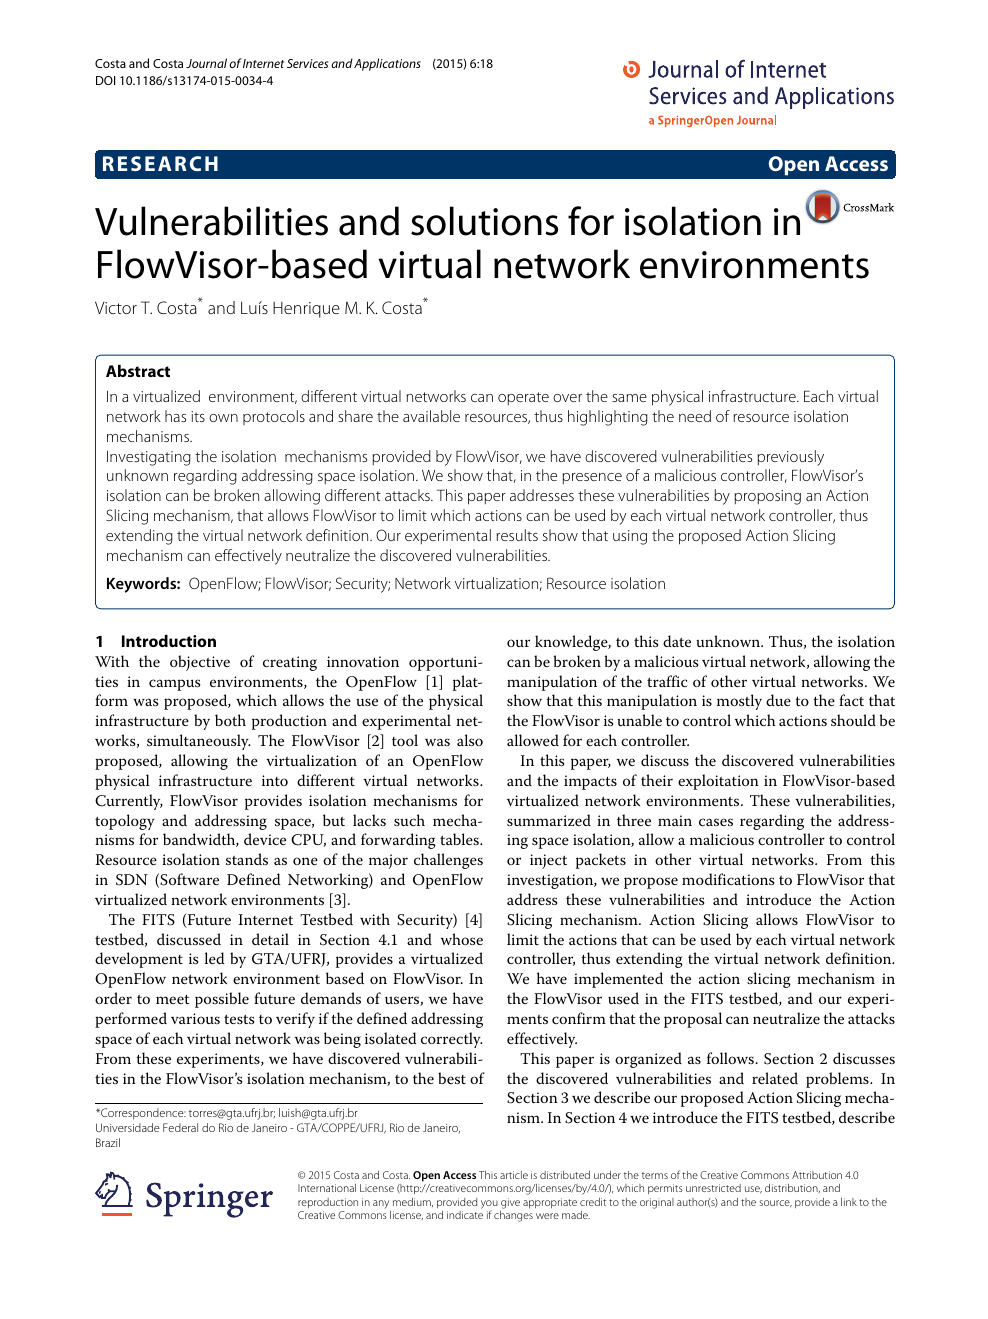 Vulnerabilities And Solutions For Isolation In Flowvisor Based Virtual Network Environments Topic Of Research Paper In Computer And Information Sciences Download Scholarly Article Pdf And Read For Free On Cyberleninka Open Science